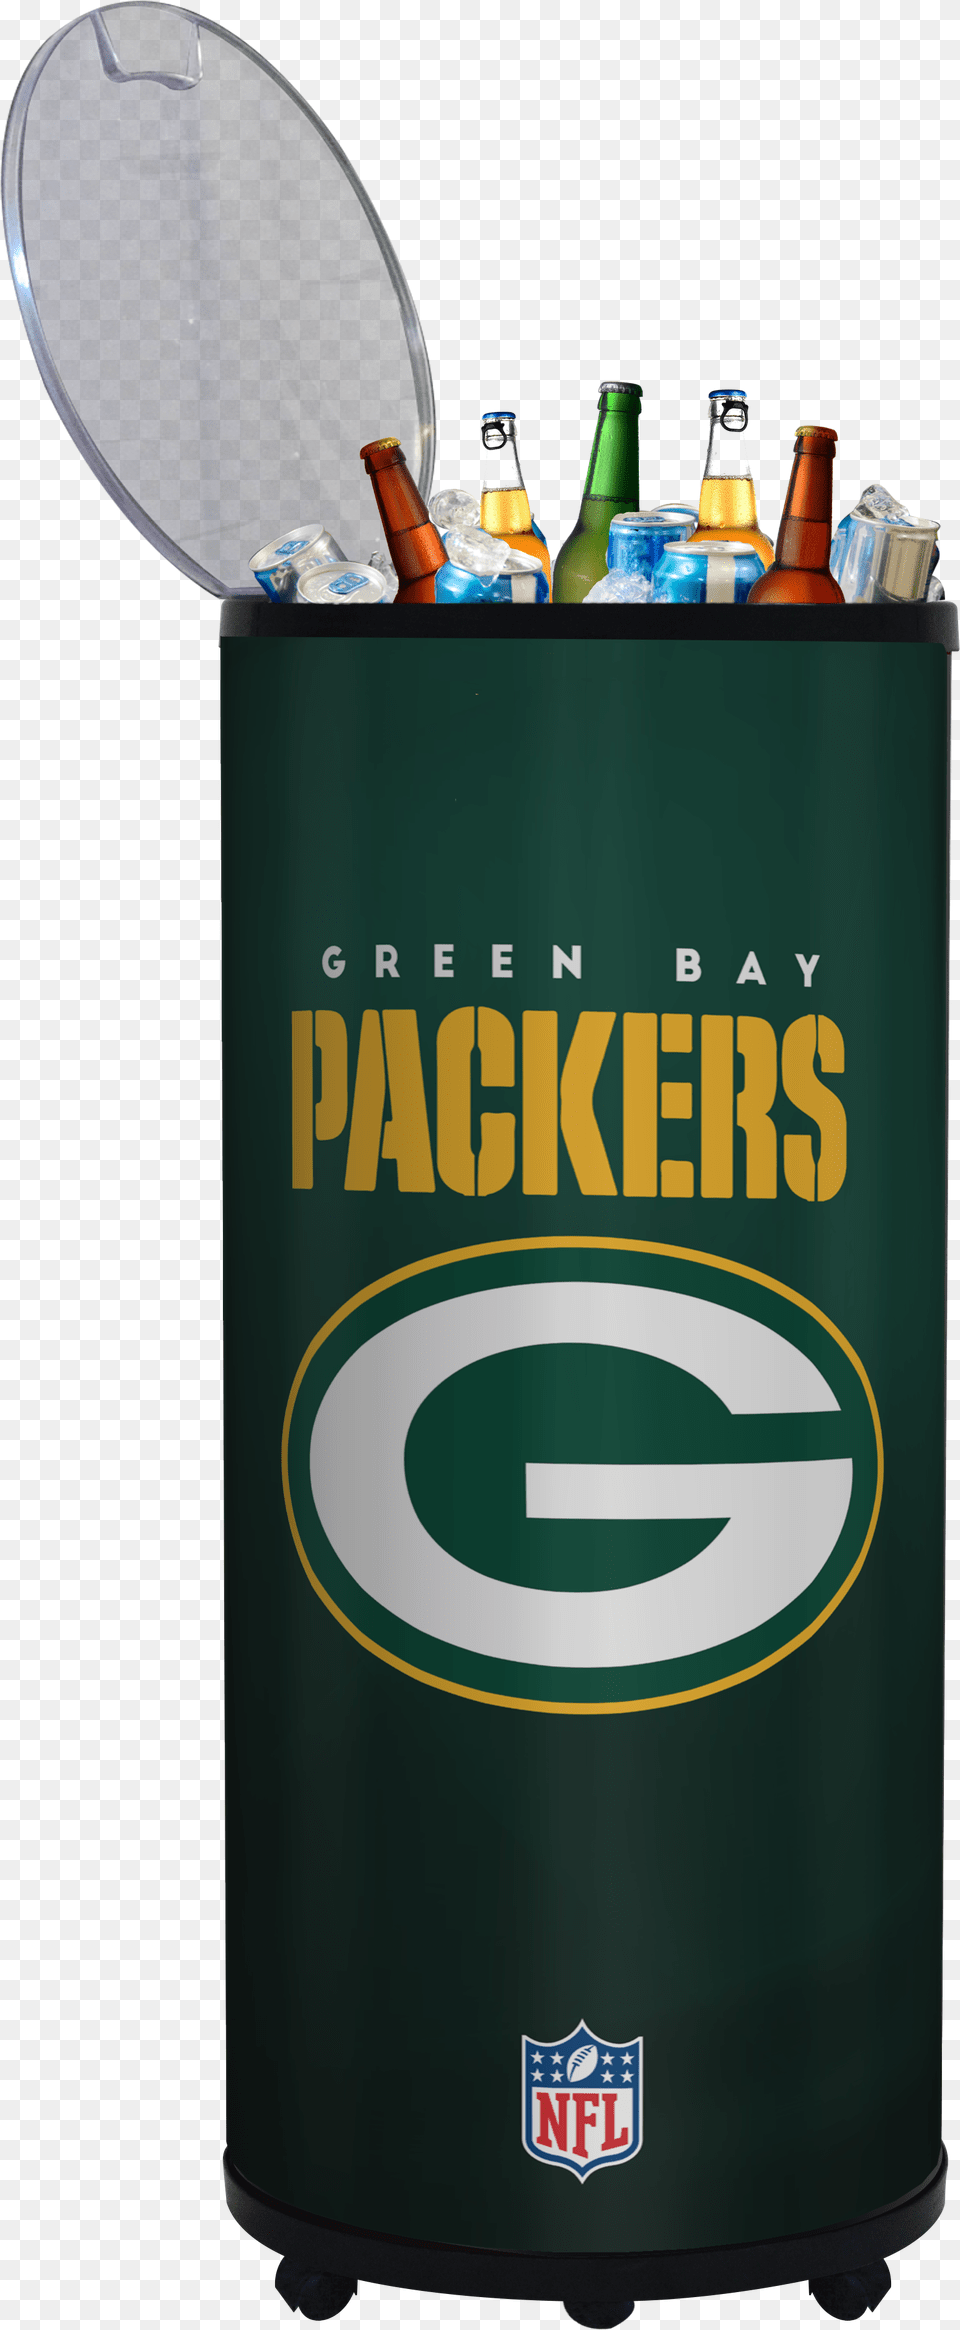 Download Green Bay Packers Fans Nfl Football Poster Green Bay Packers, Bottle, Alcohol, Beer, Beverage Free Transparent Png